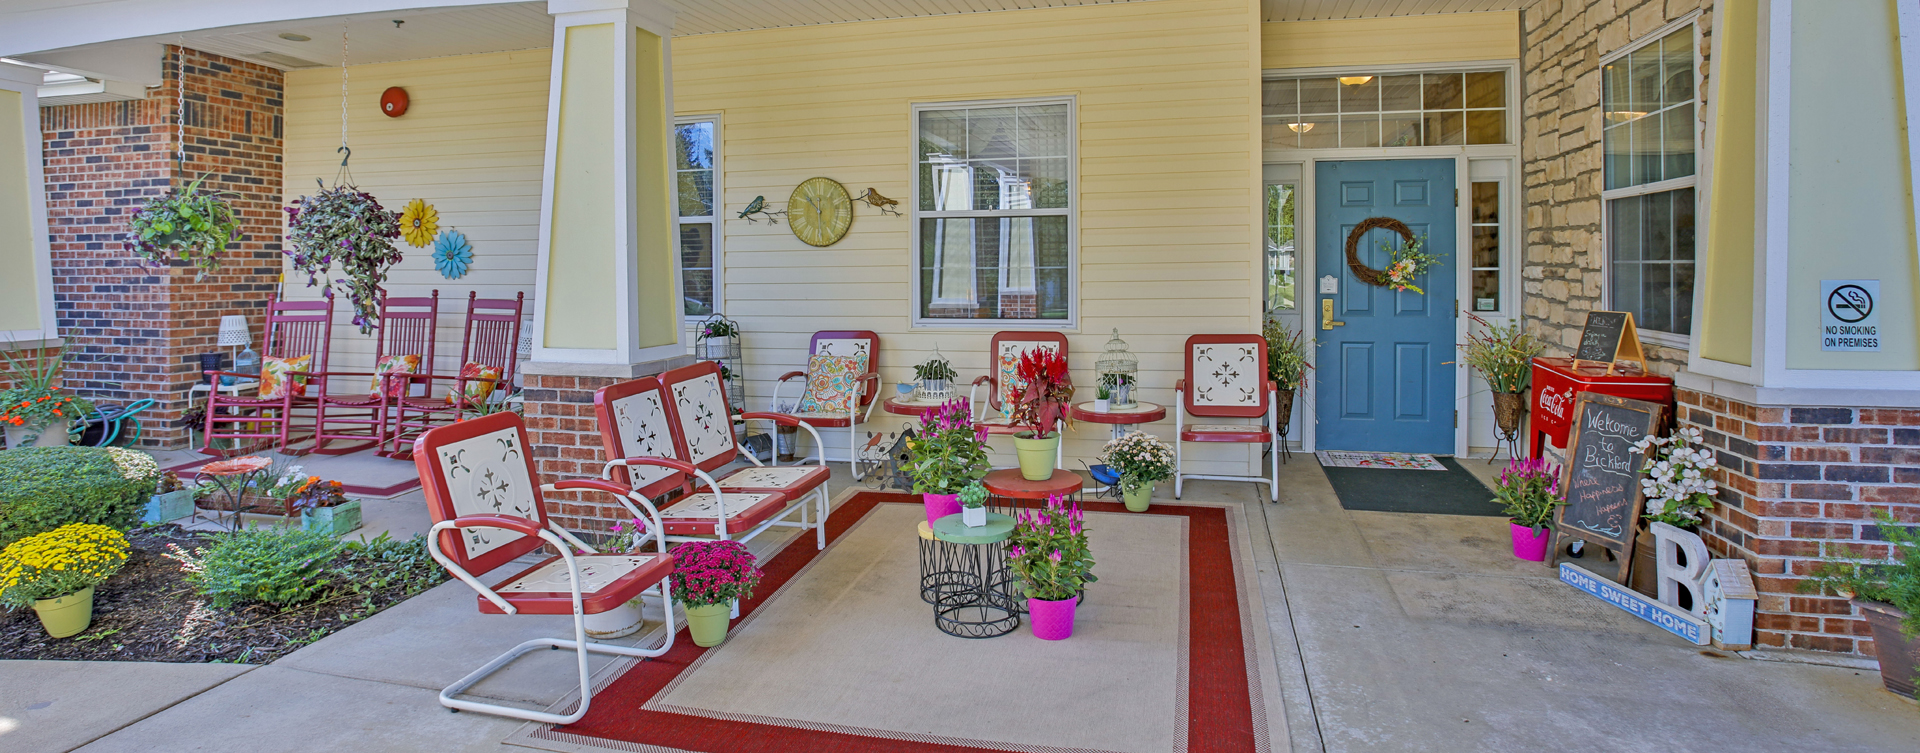 Enjoy conversations with friends on the porch at Bickford of Crawfordsville